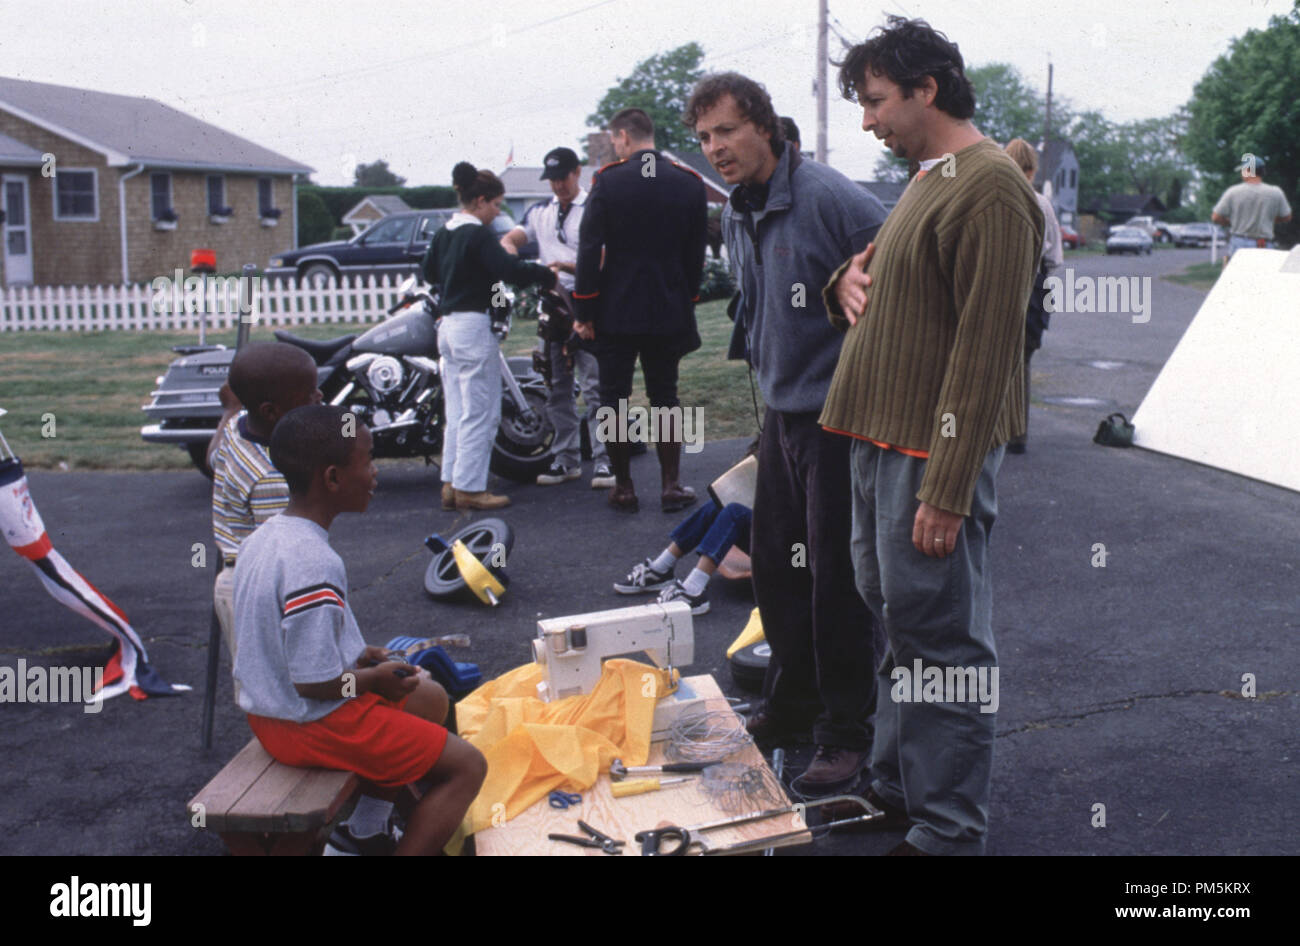 Film Still / Publicity Stills from 'Me, Myself and Irene'  Director's Bobby and Peter Farrelly © 2000 20th Century Fox Photo Credit: Melinda Sue Gordon File Reference # 30846377THA  For Editorial Use Only -  All Rights Reserved Stock Photo